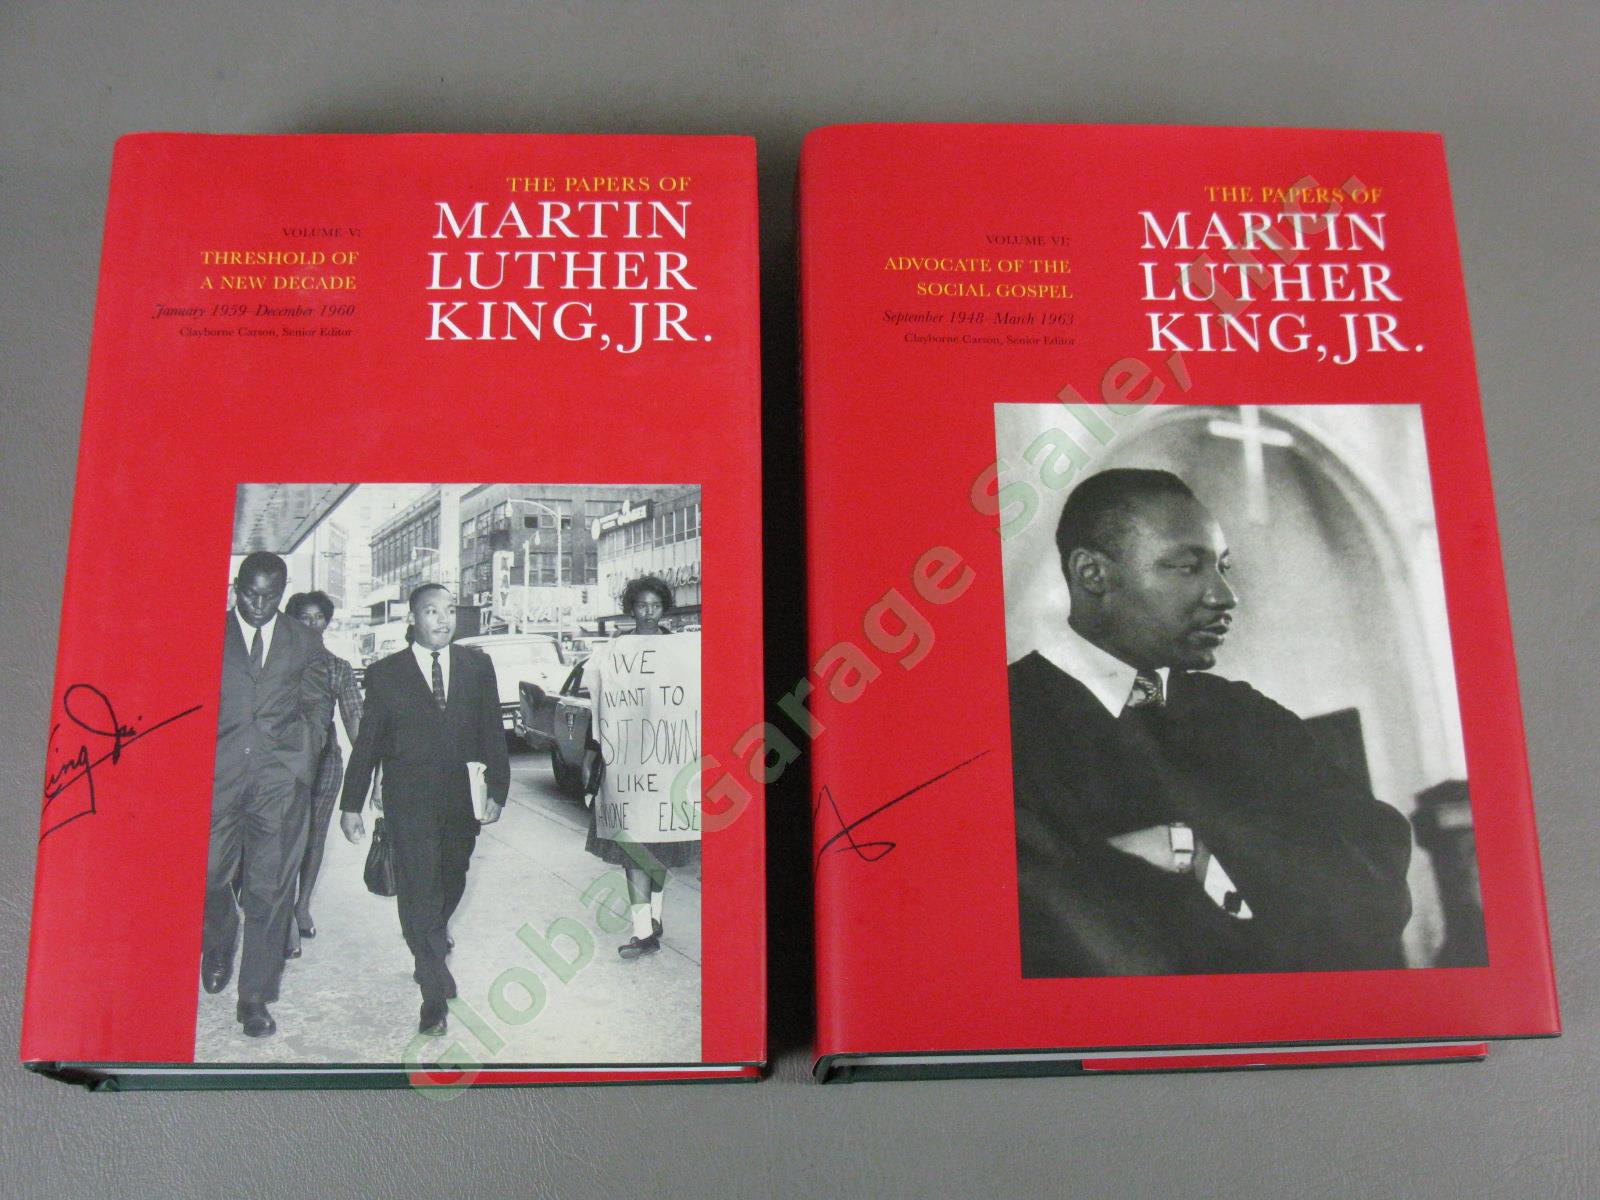 MINT! Never Read! Papers of Martin Luther King Jr Volumes I-VII Rare Full Set! 7